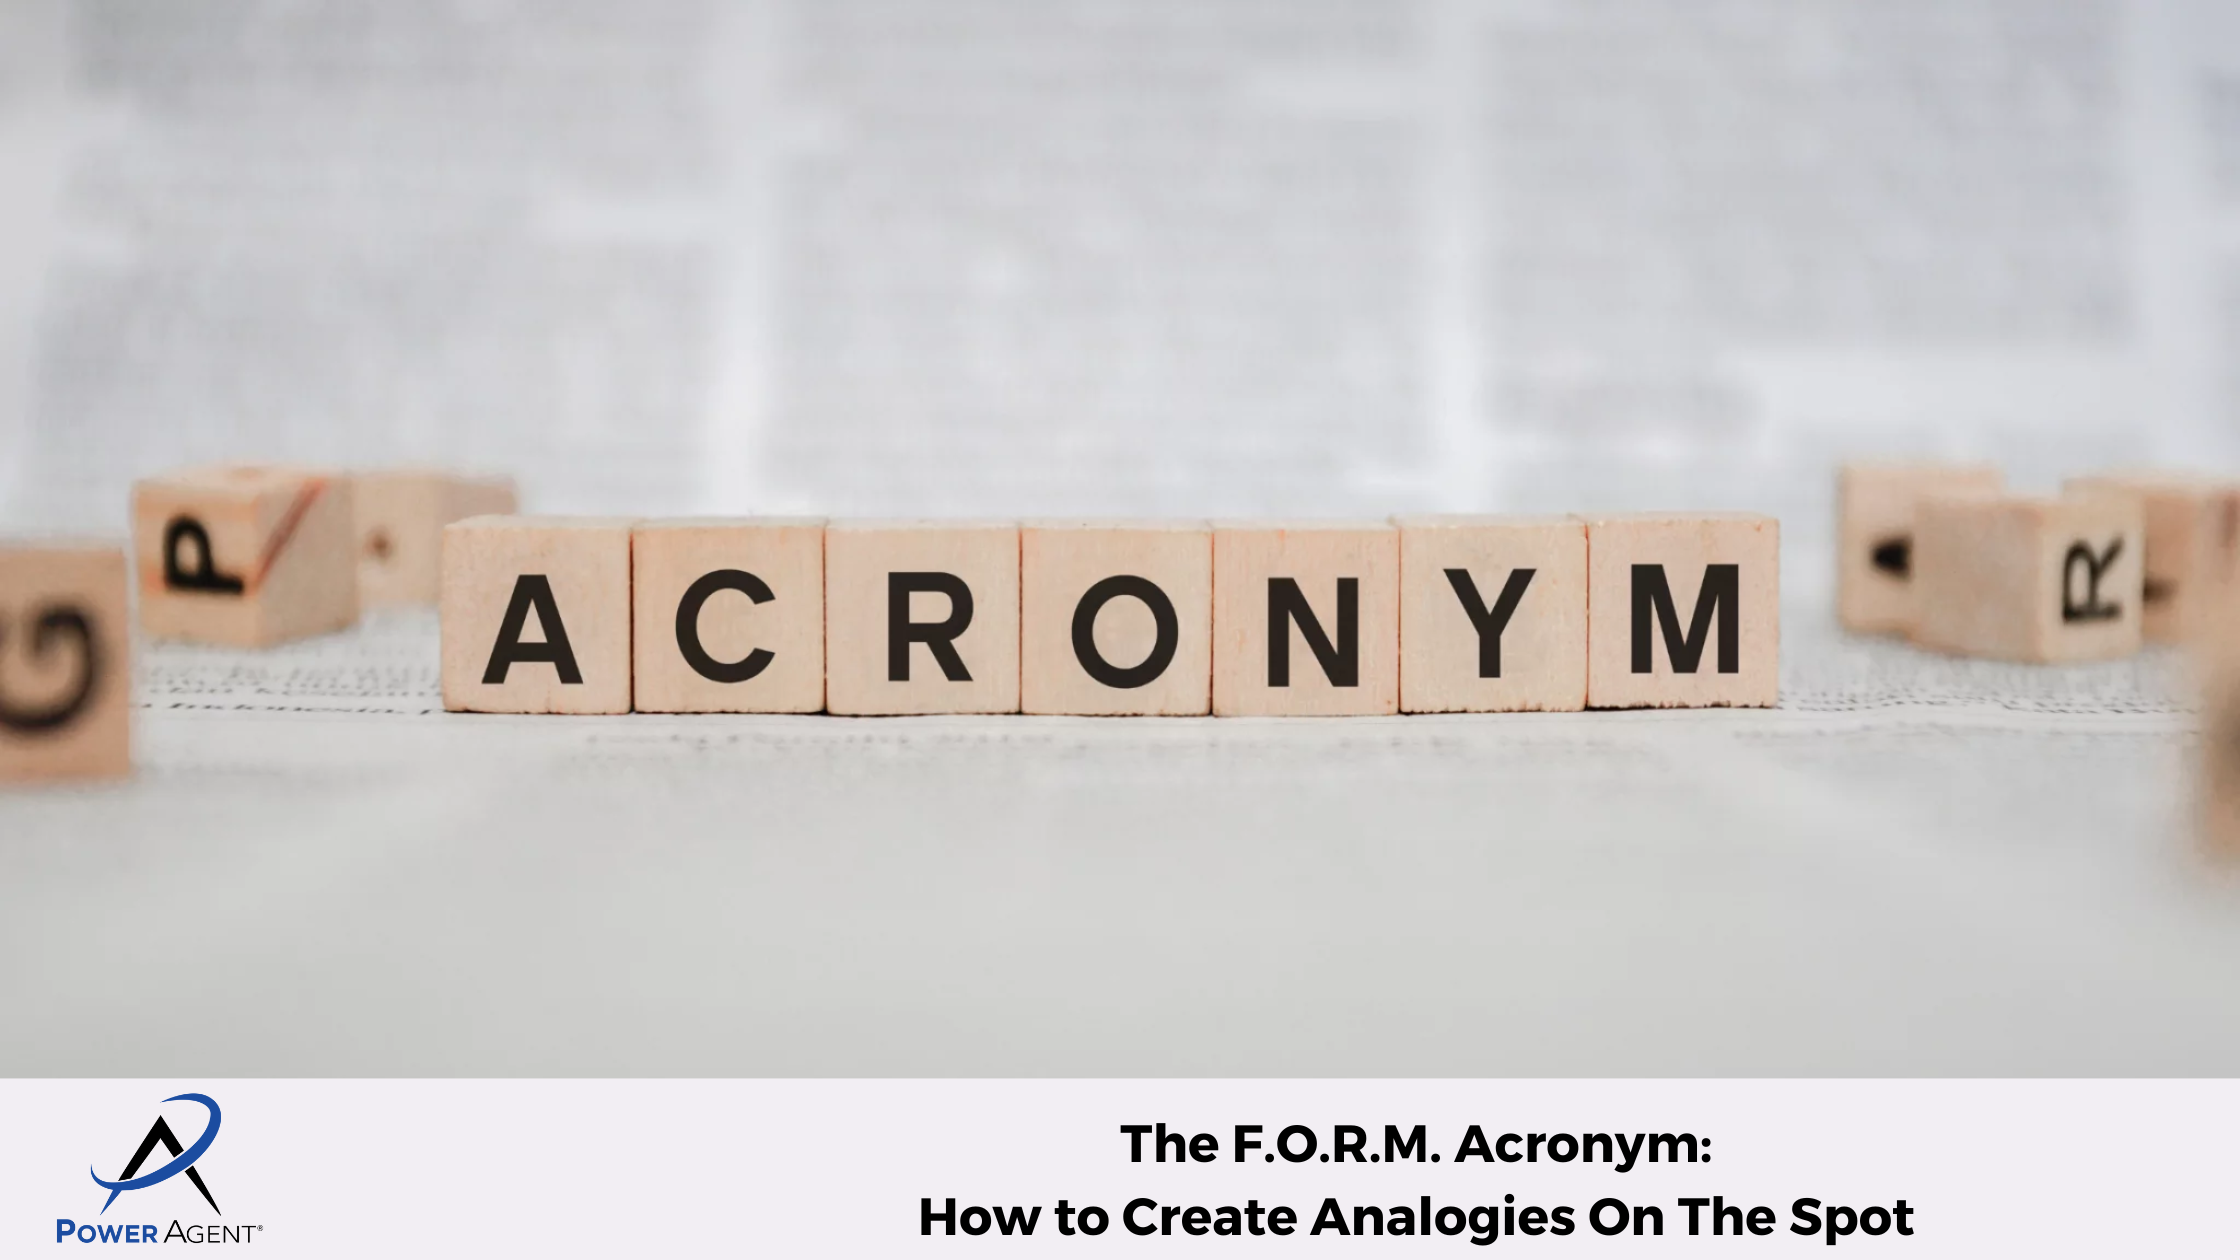 The F.O.R.M. Acronym: How to Create Analogies On The Spot